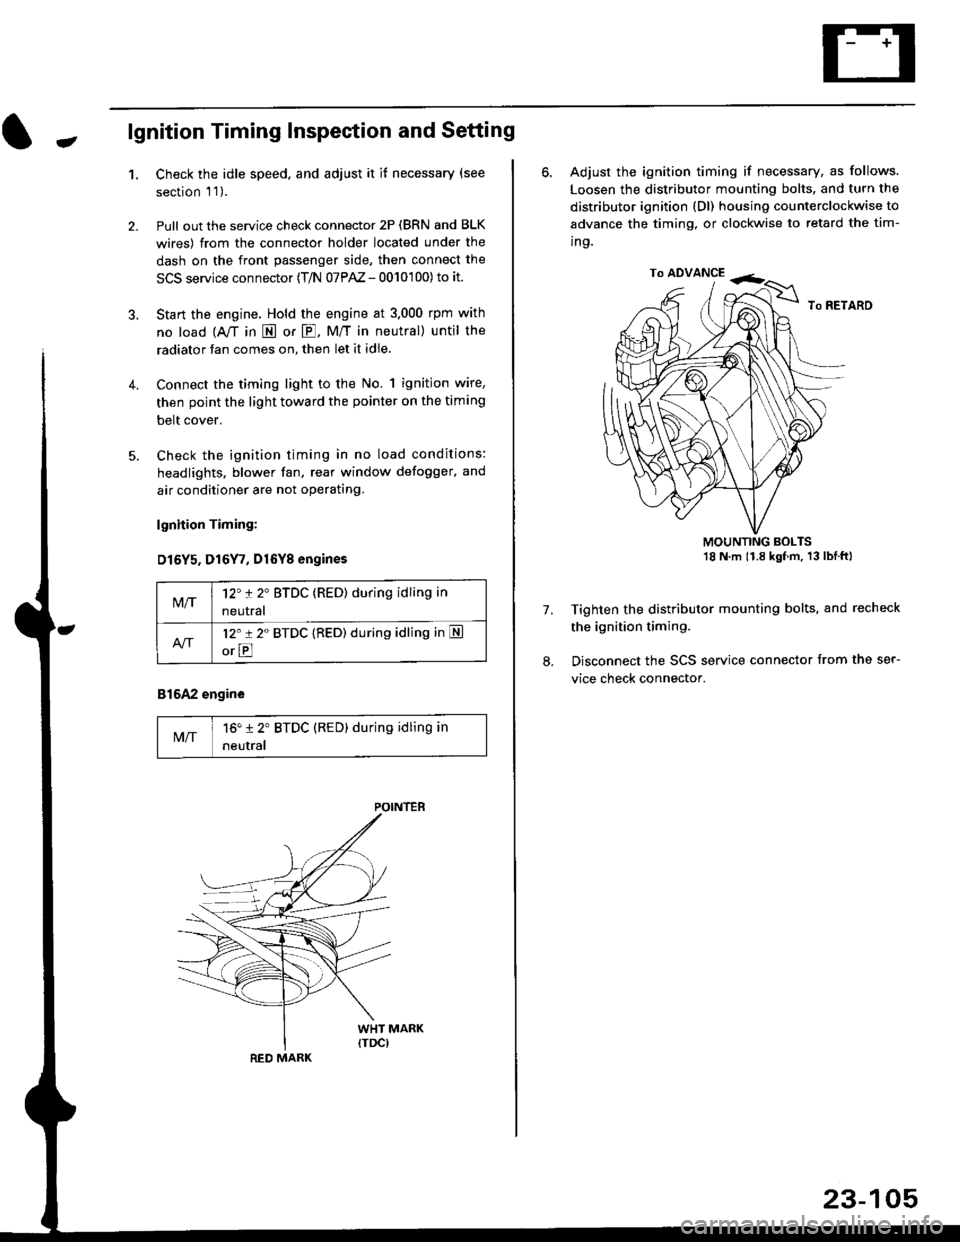 HONDA CIVIC 1998 6.G Manual PDF -lgnition Timing Inspection and Setting
1.Check the idle speed, and adjust it it necessary (see
section l 1 ).
Pull out the service check connector 2P (BRN and BLK
wires) from the connector holder l